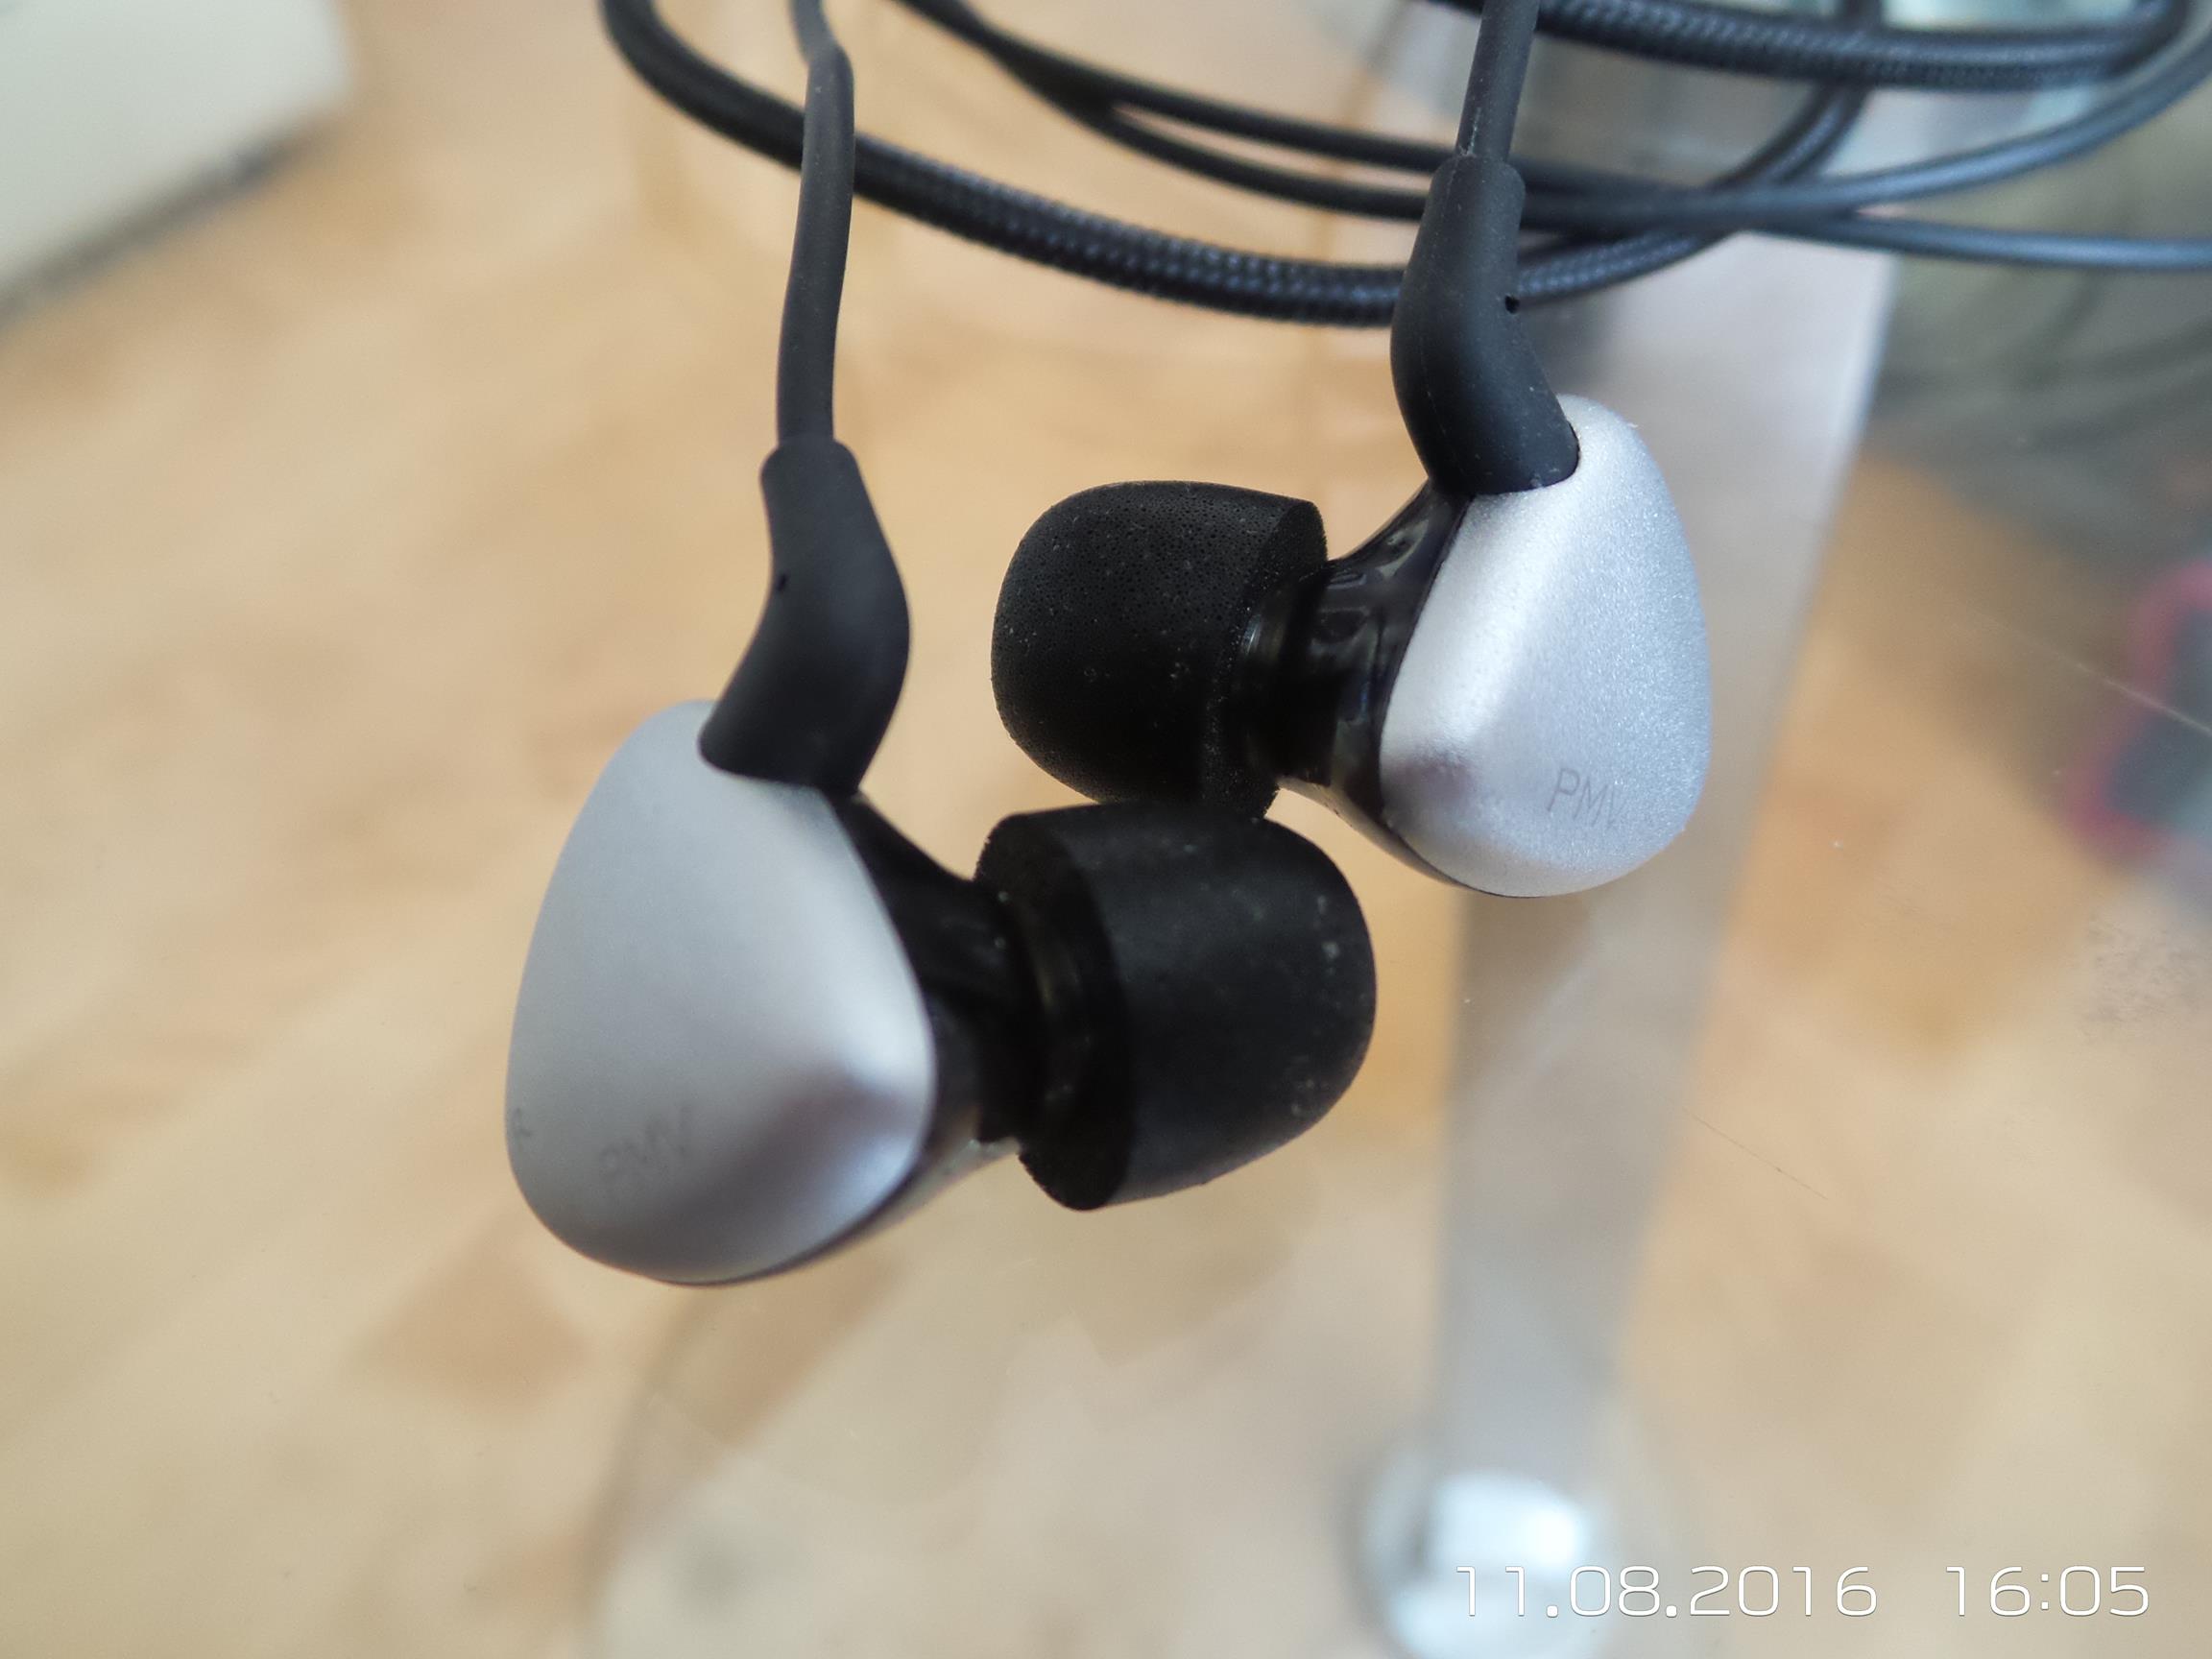 PMV A-01 MKII Earphone Quick Review by mark2410